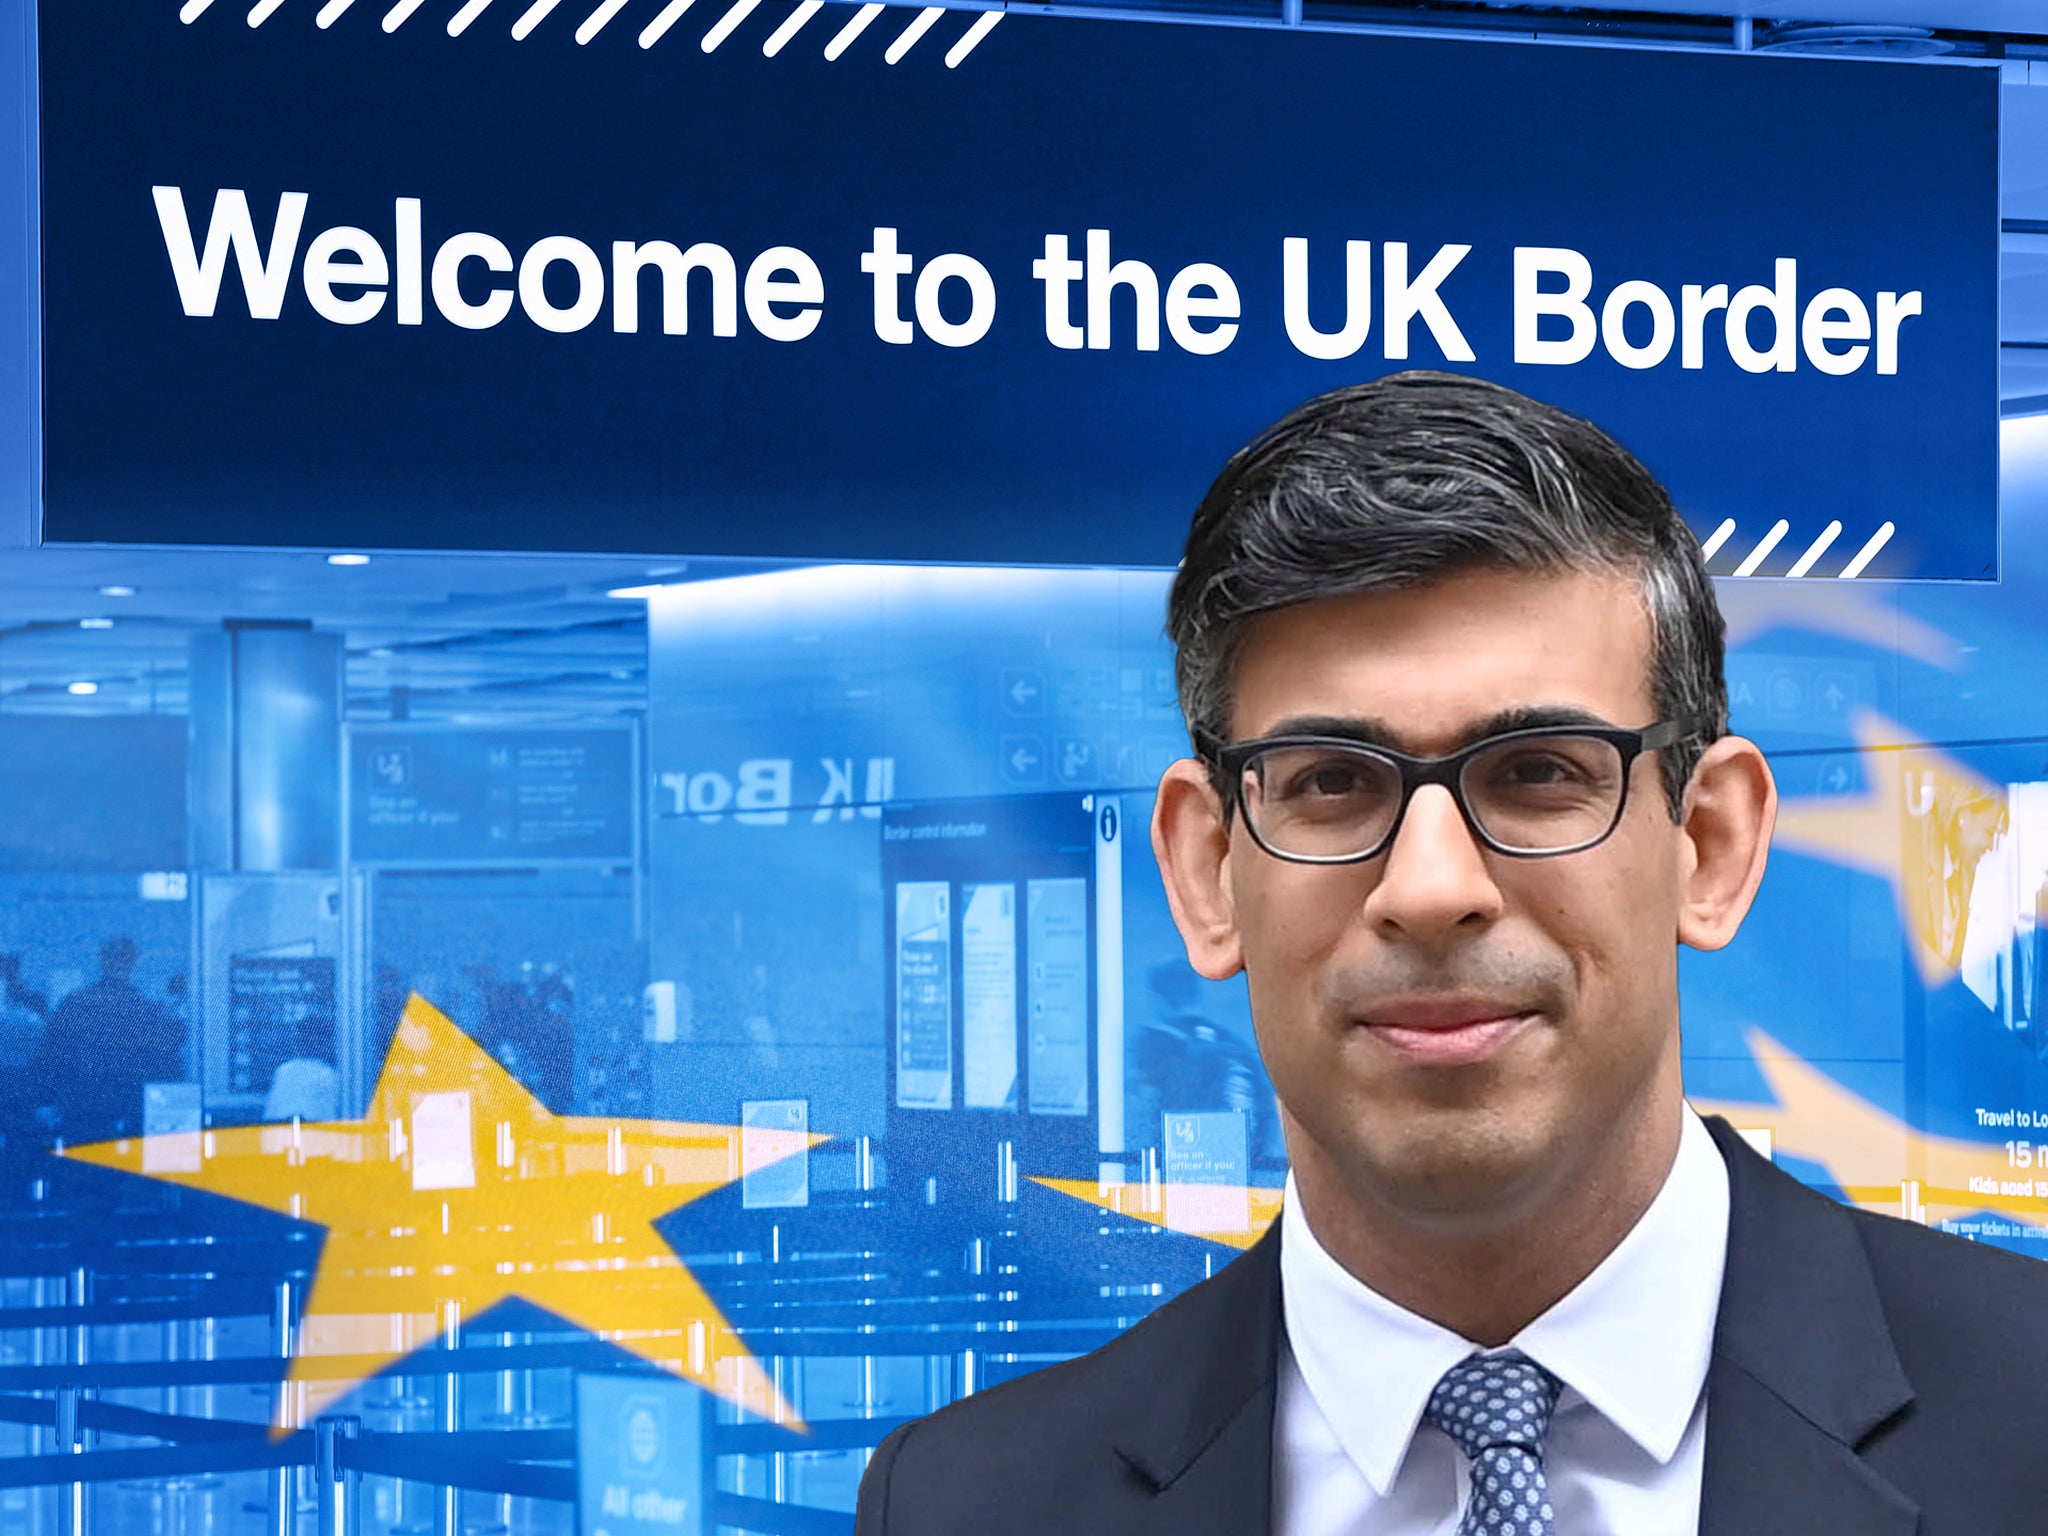 Rishi Sunak will be questioned on immigration and deal with EU